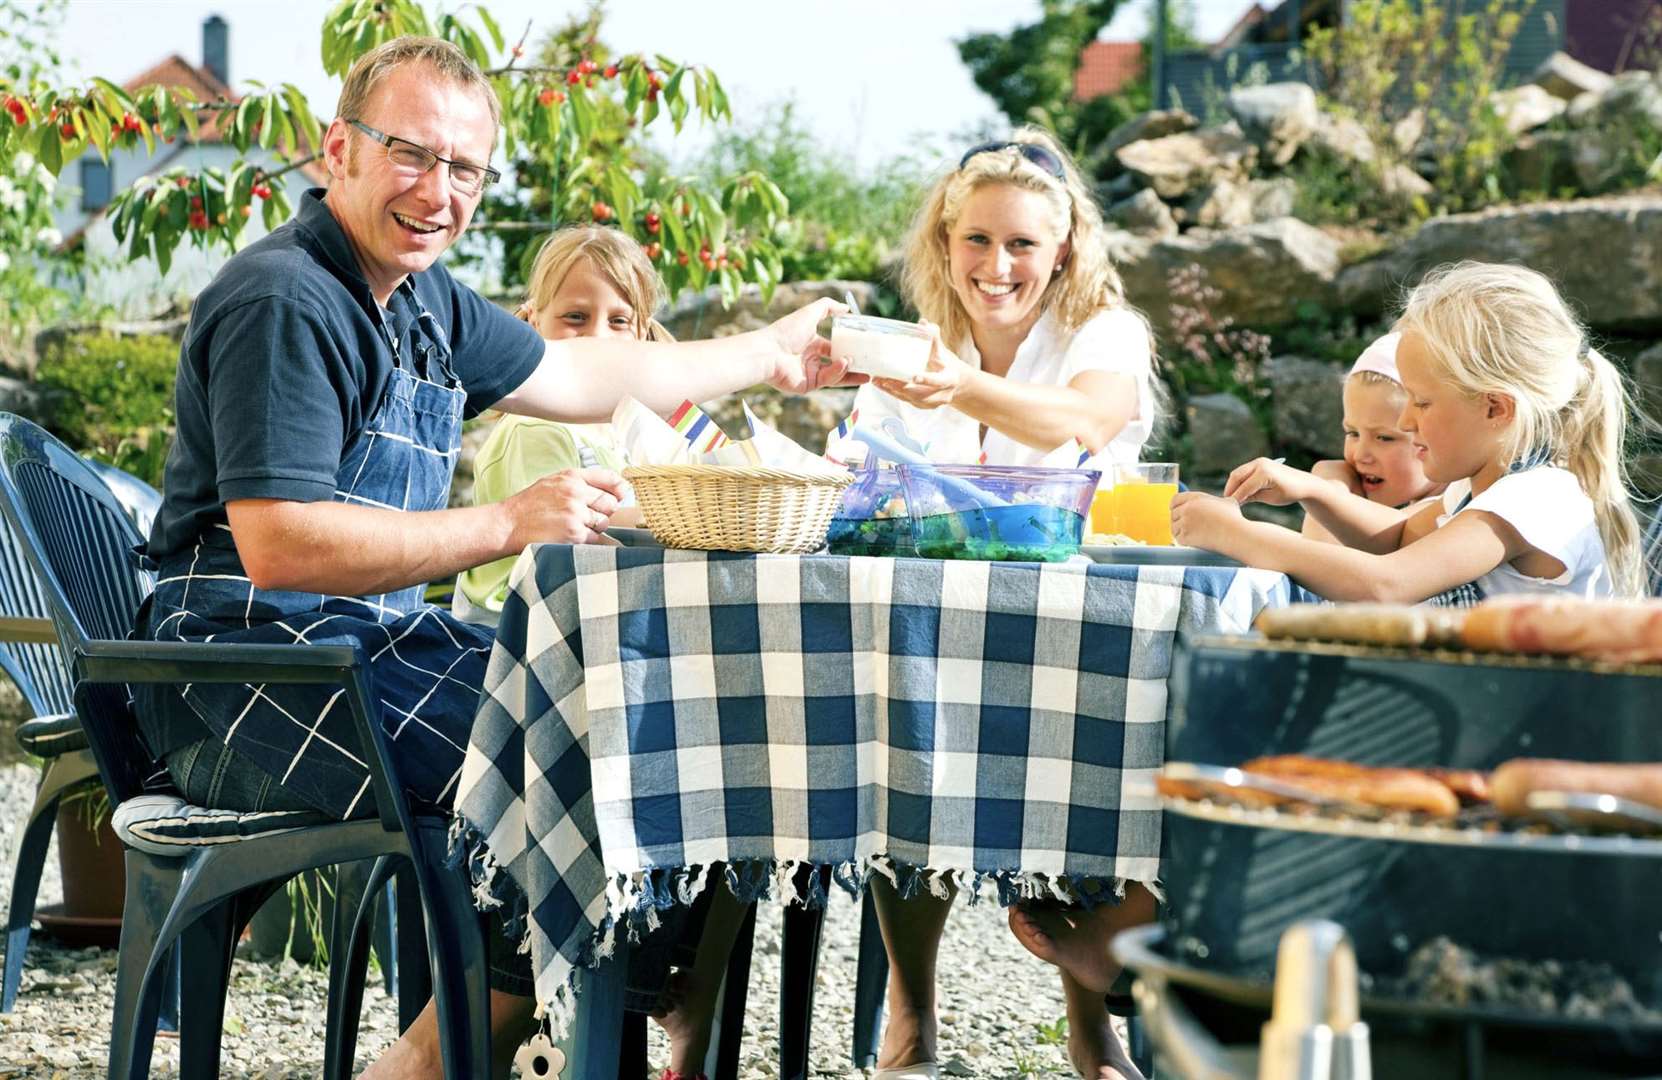 Cookers and stoves can generate heat indoors. Cooking and eating outside can help.